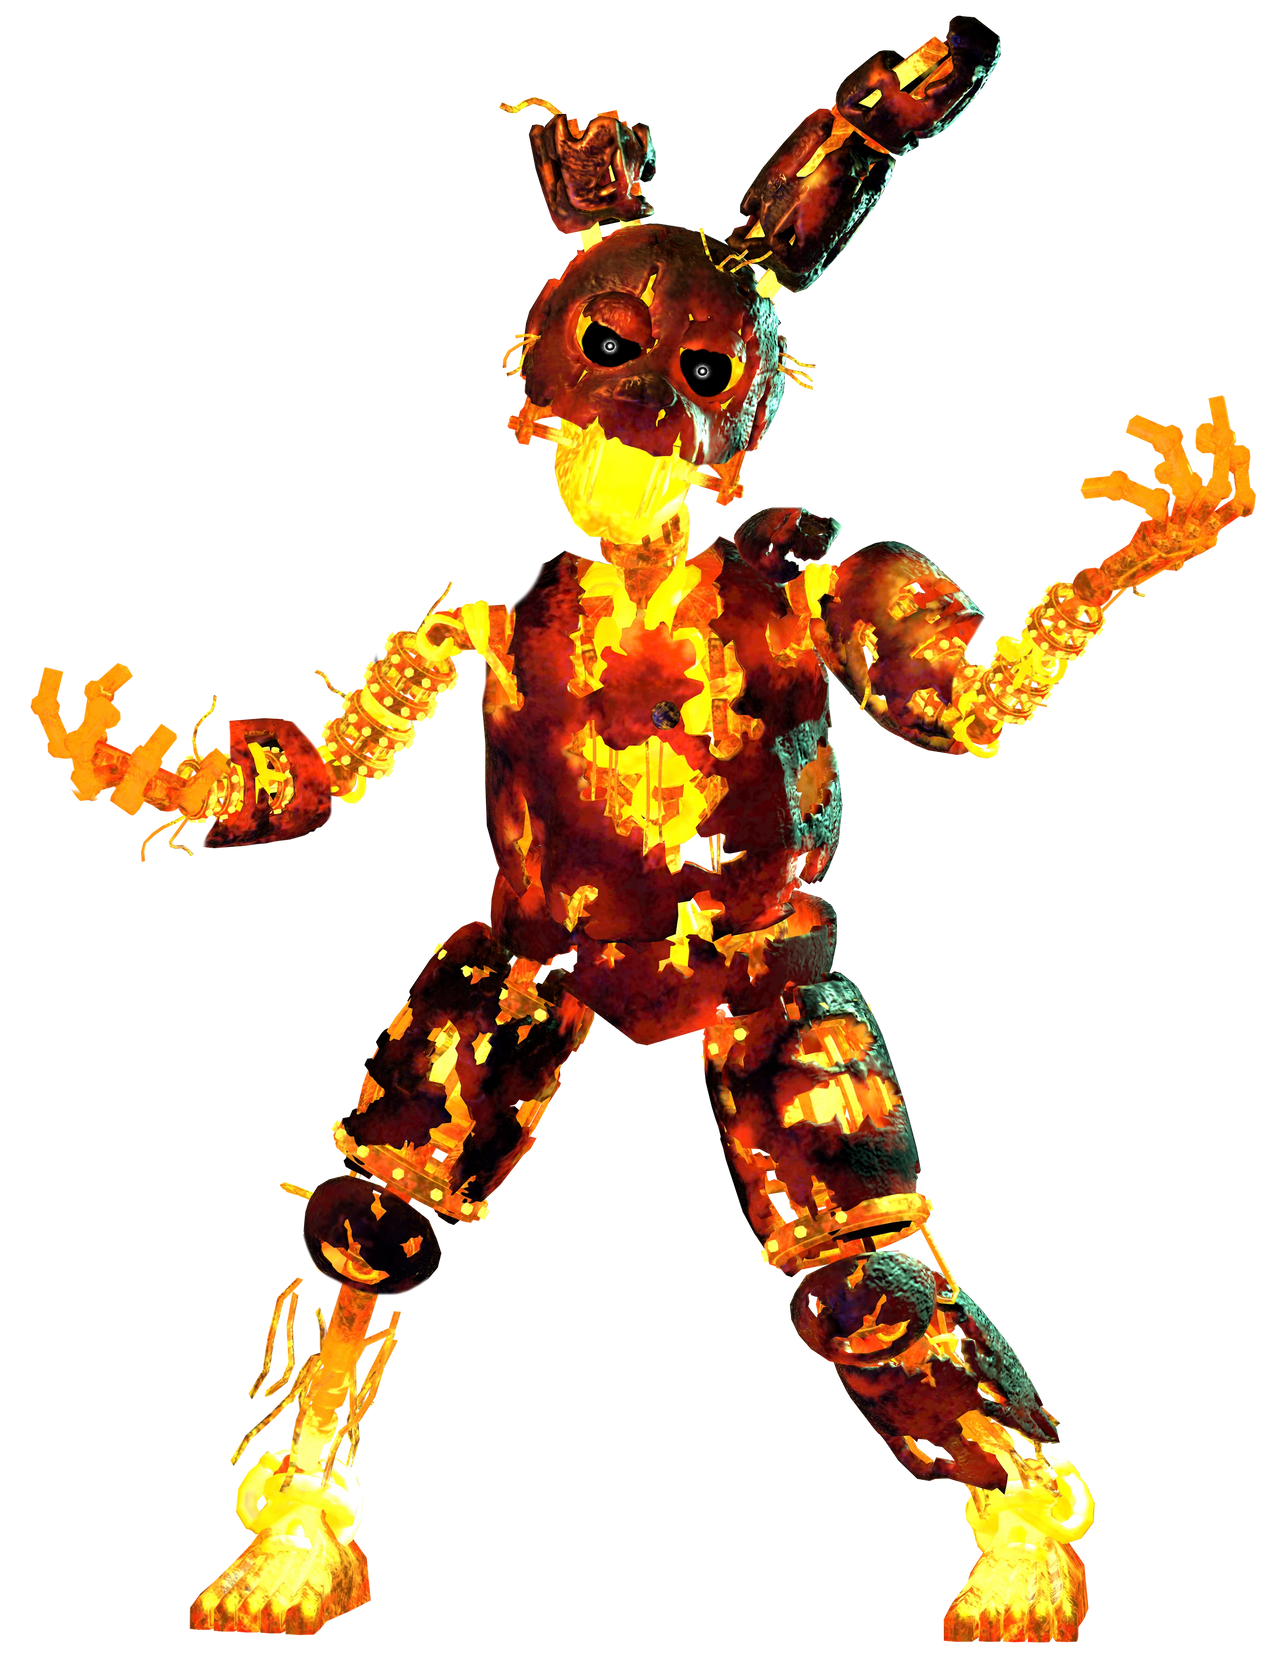 flaming, springtrap, wallpapers full hd quality version on flaming springtrap wallpapers